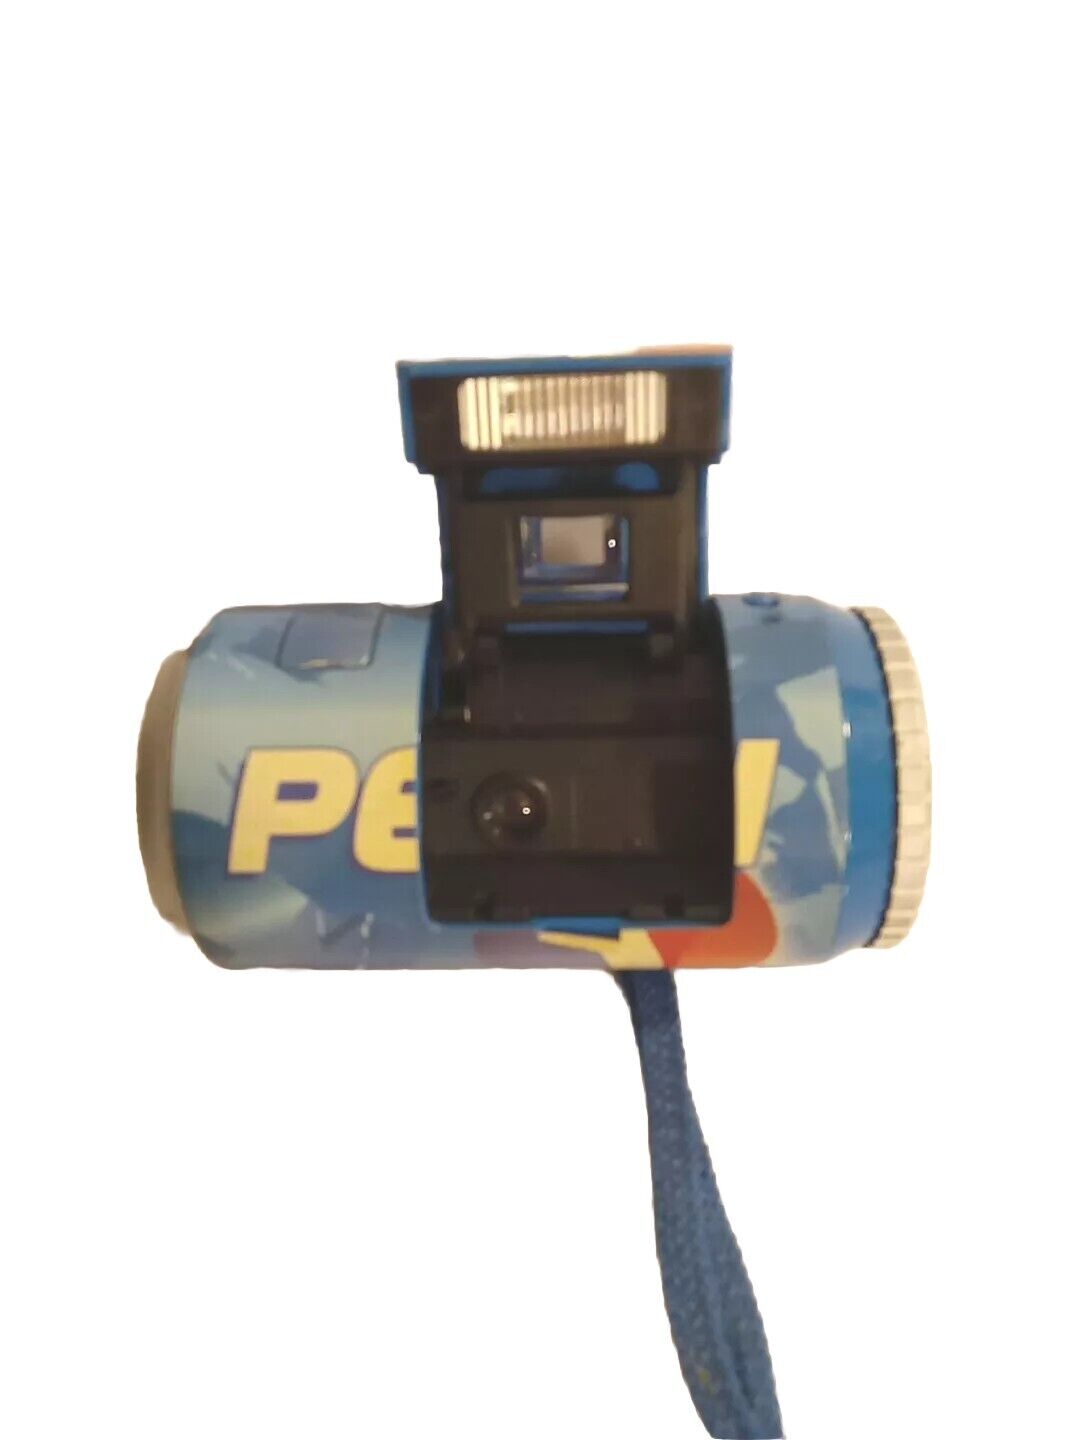 Vtg 1998 Novelty Pepsi Can 35 MM Camera with flash Battery operated Untested